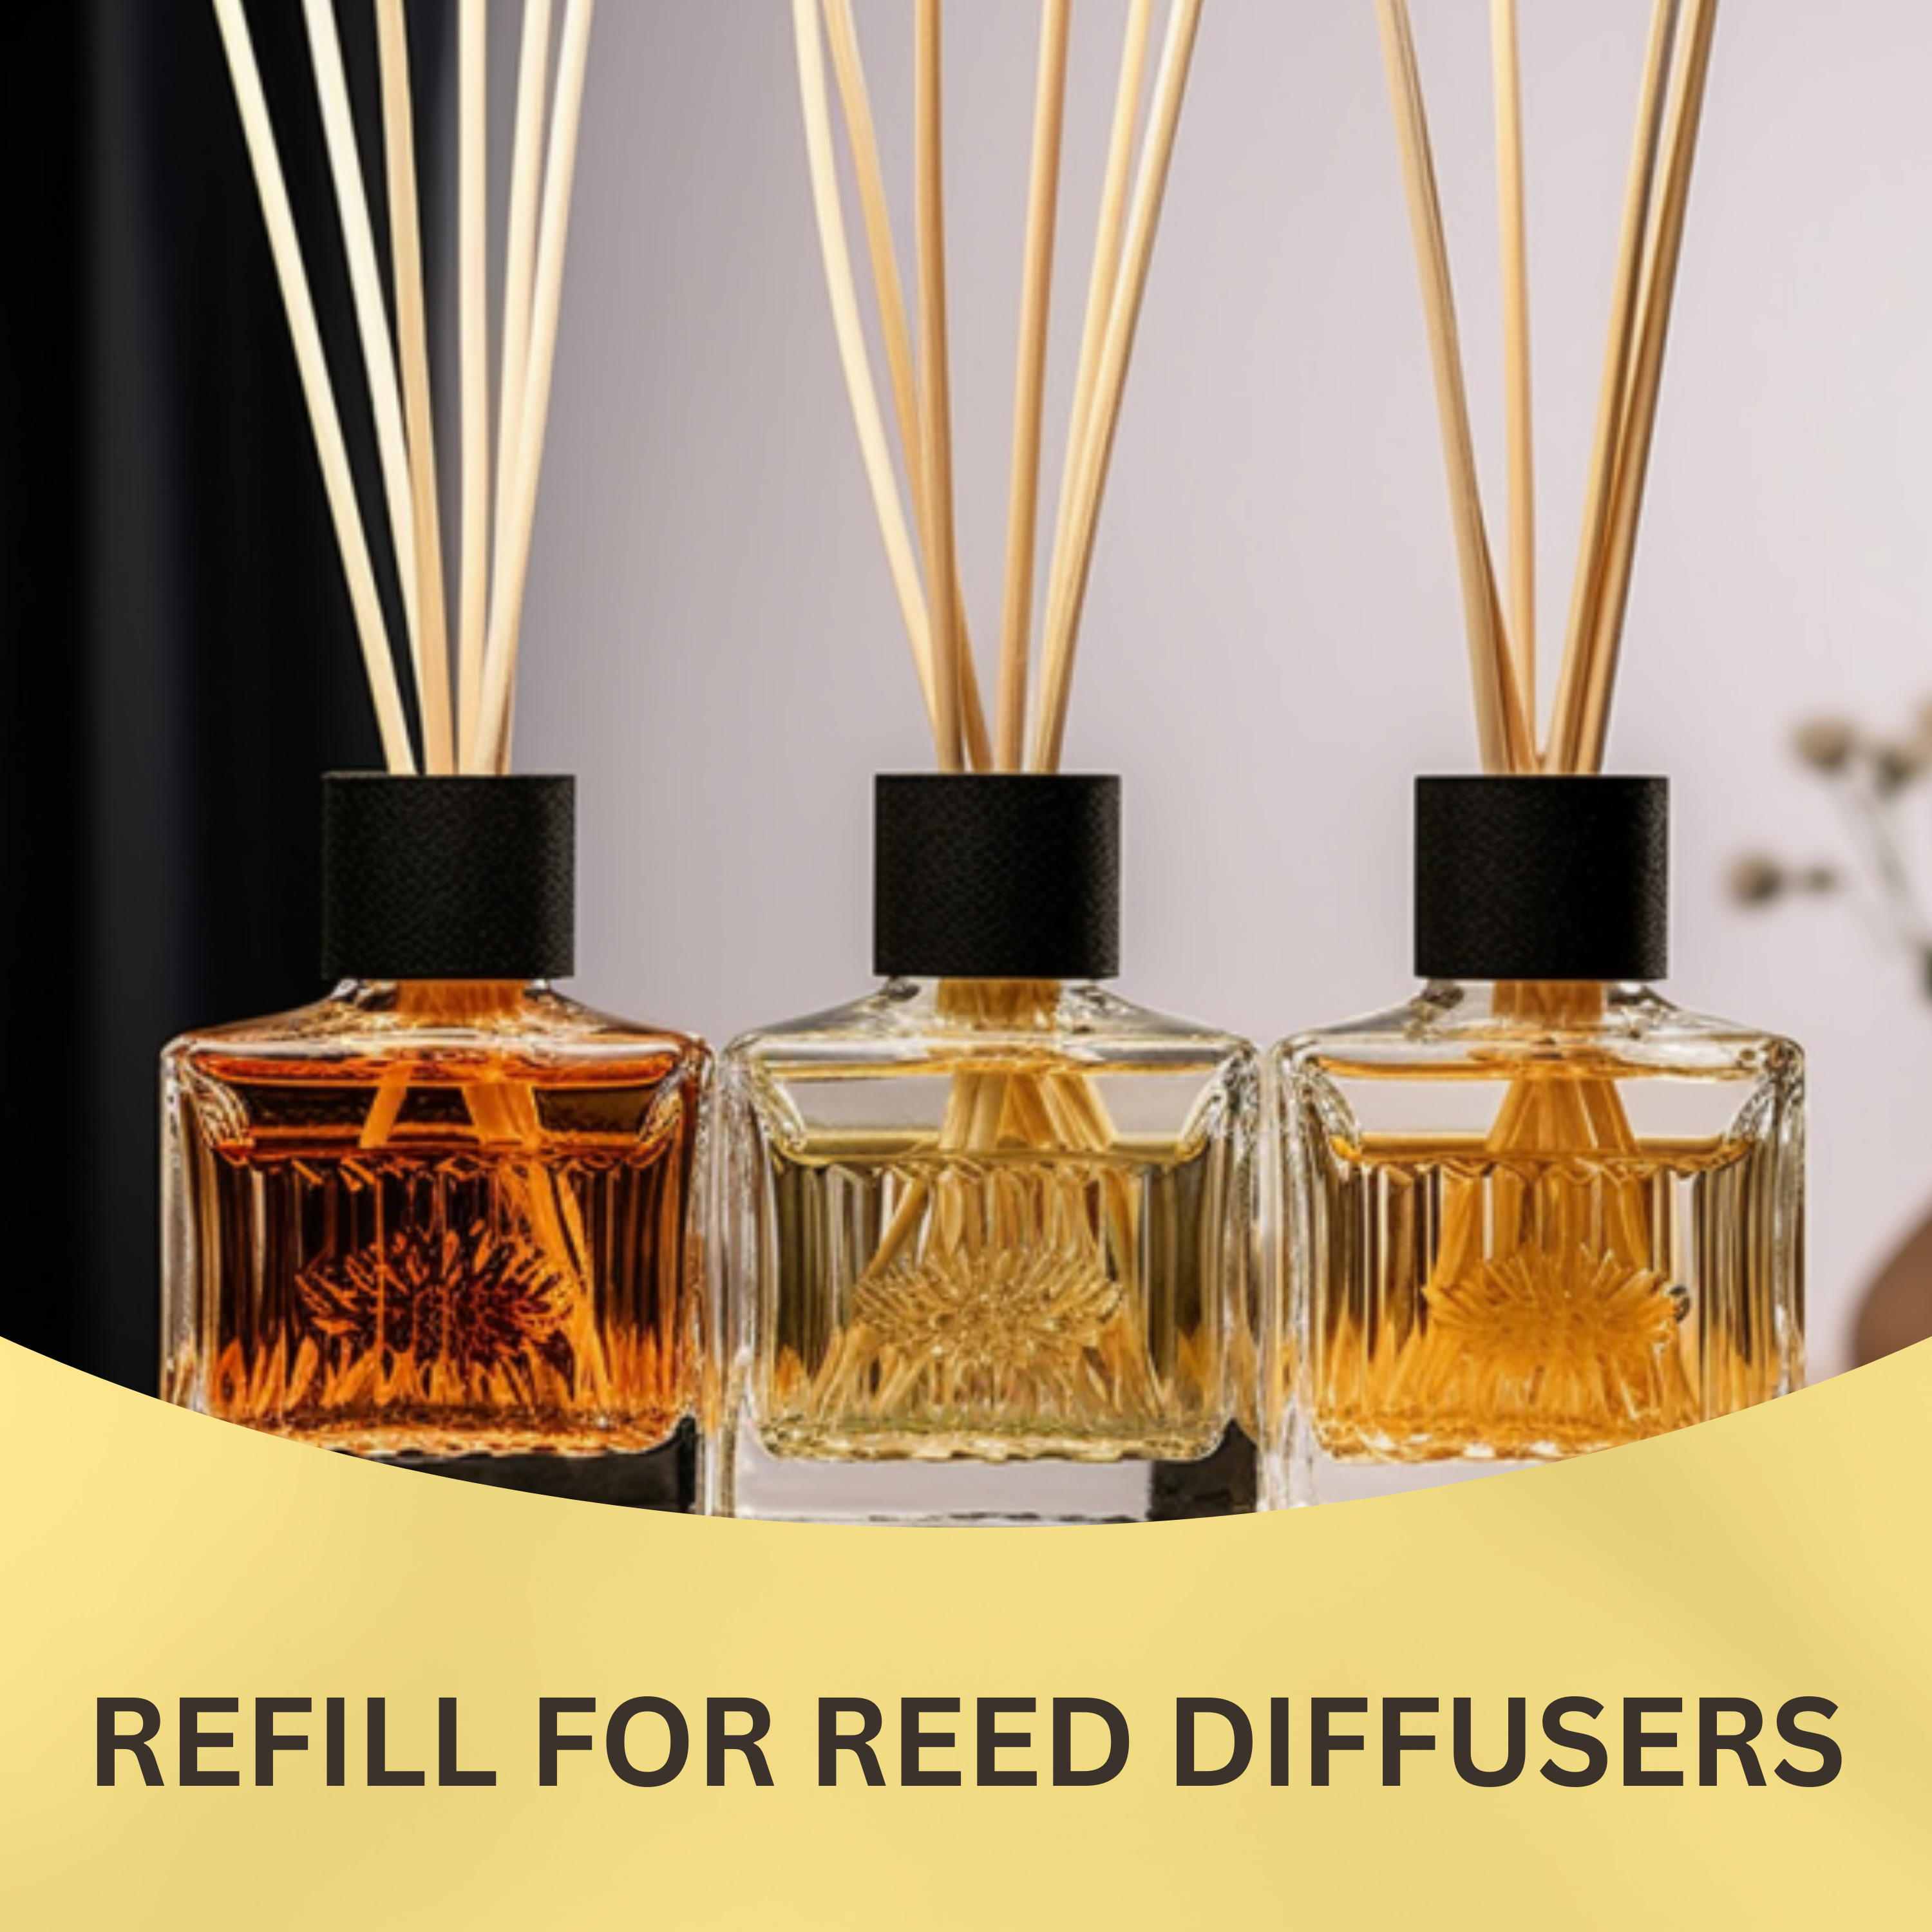 Black Canyon Blackberry & Fir Scented Reed Diffuser Oil Refill